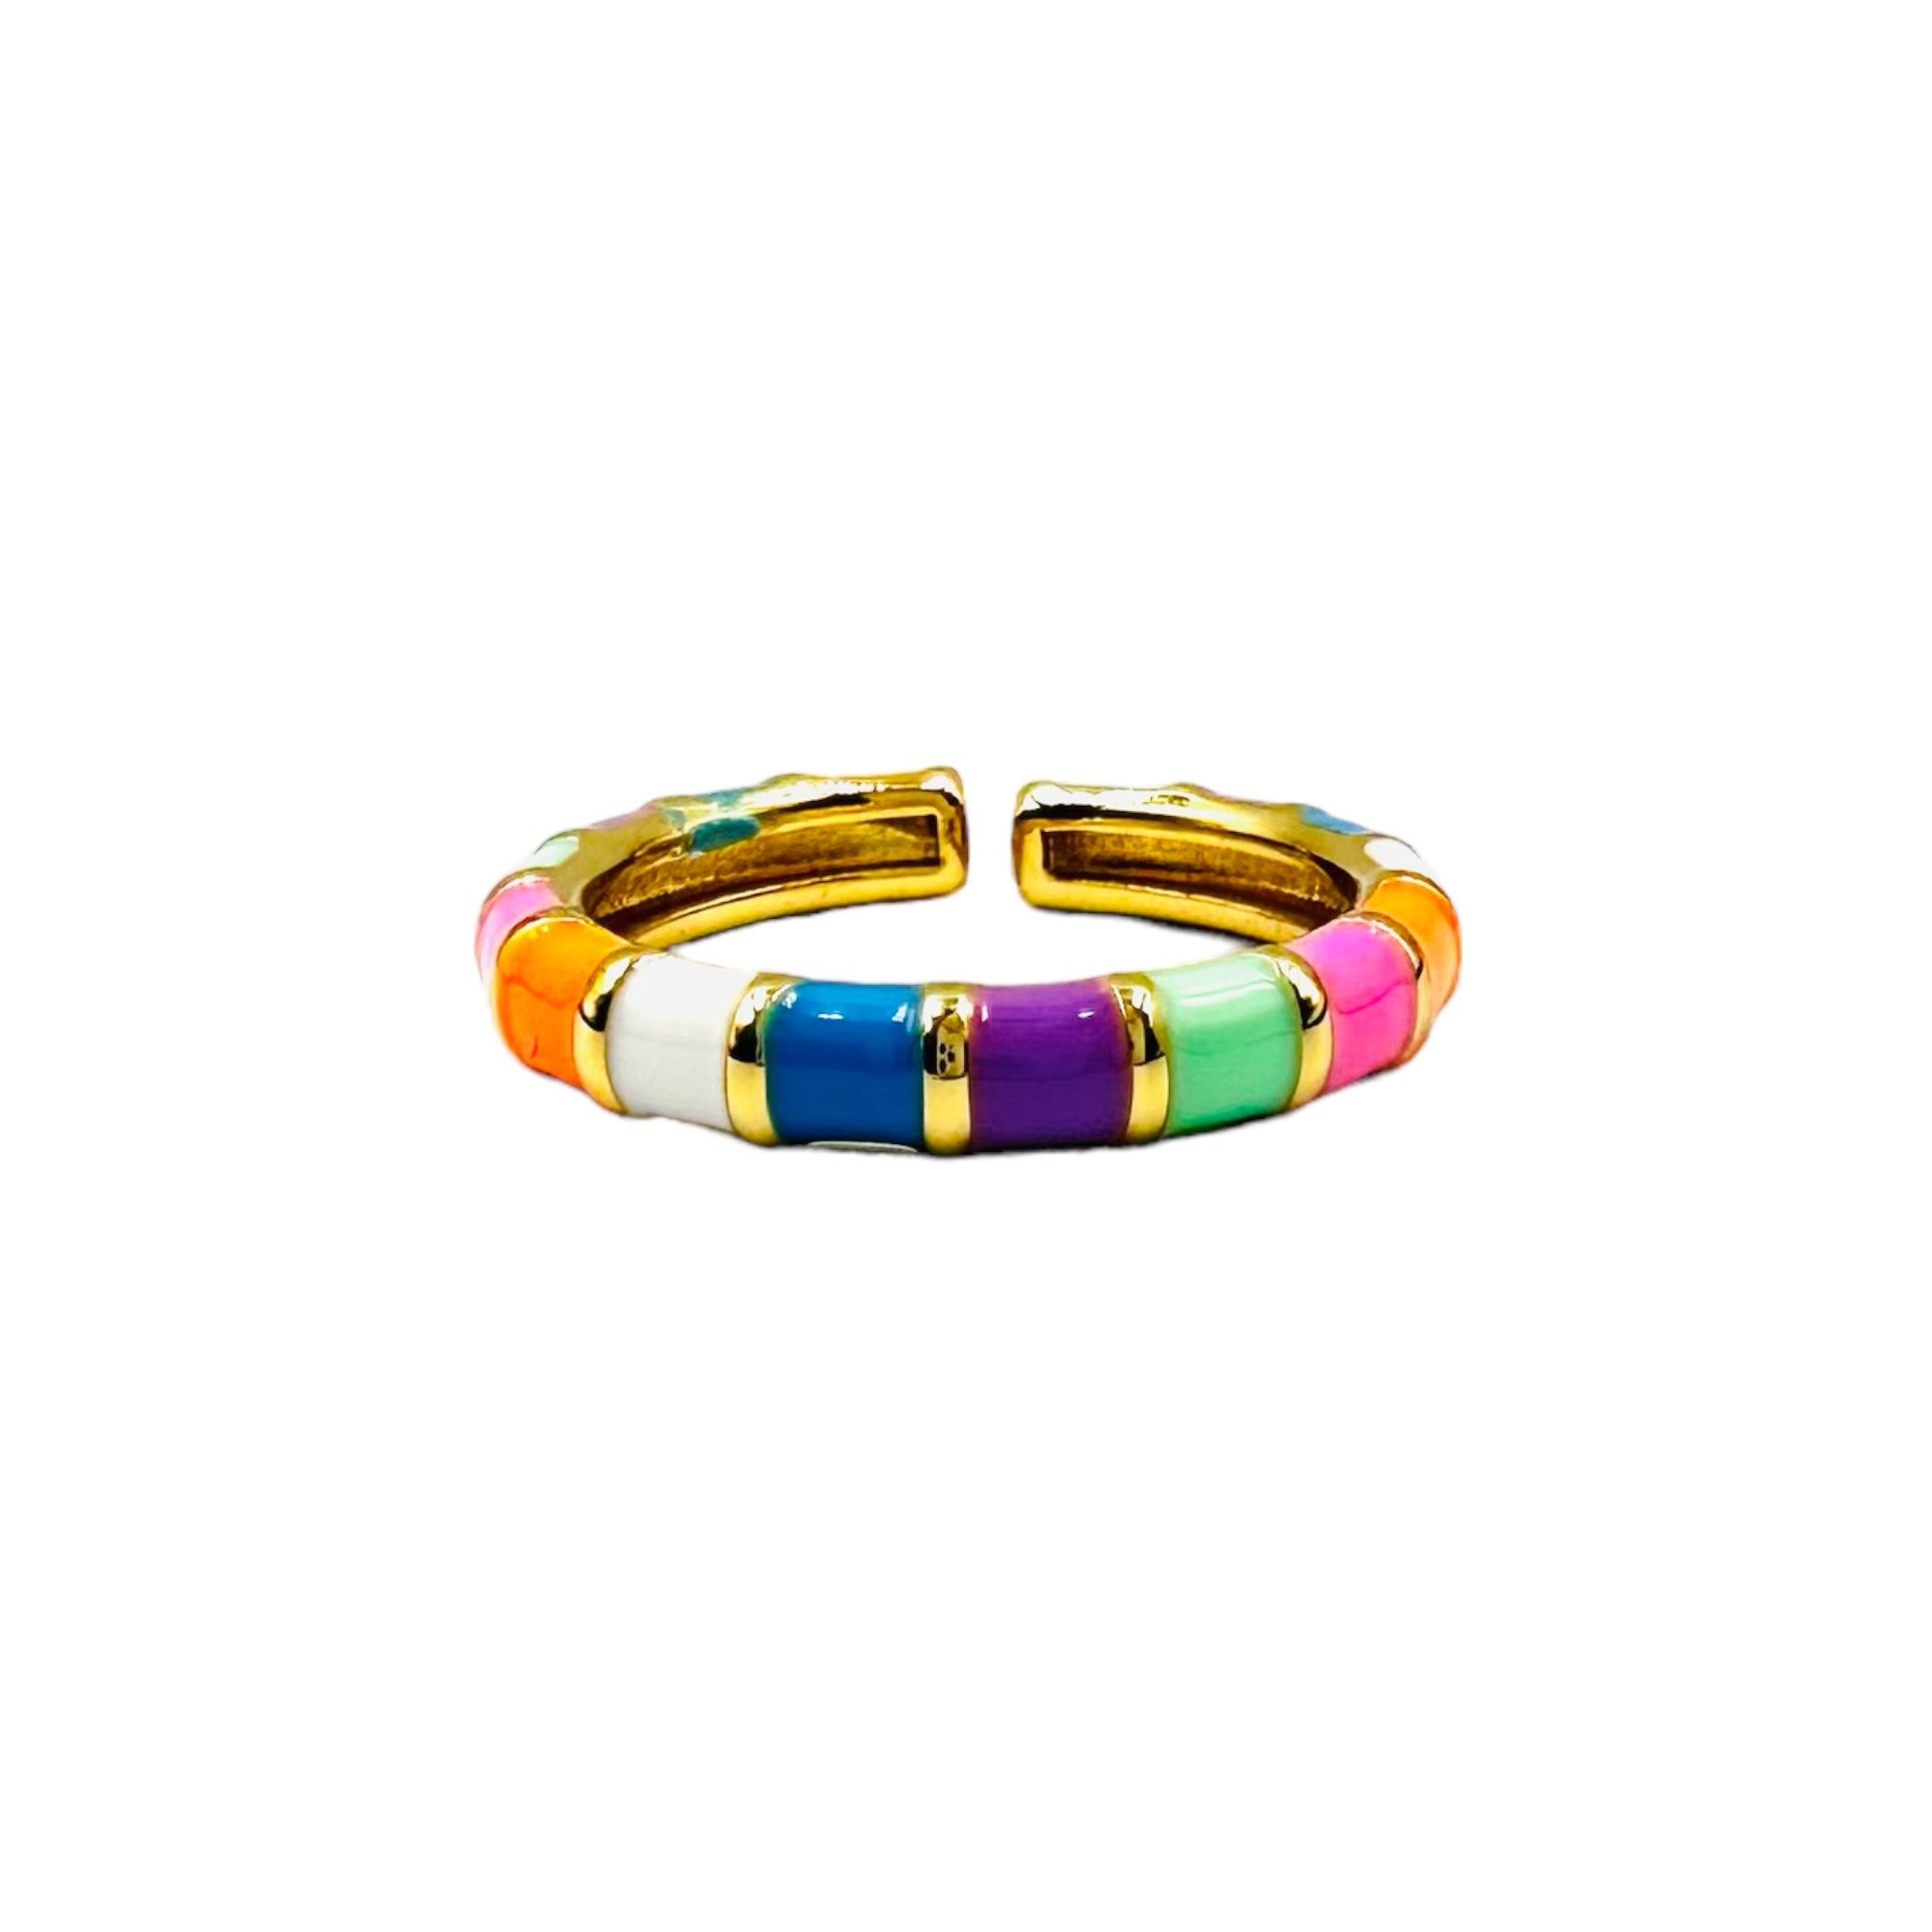 RING RAINBOW M - Available in 11 colors